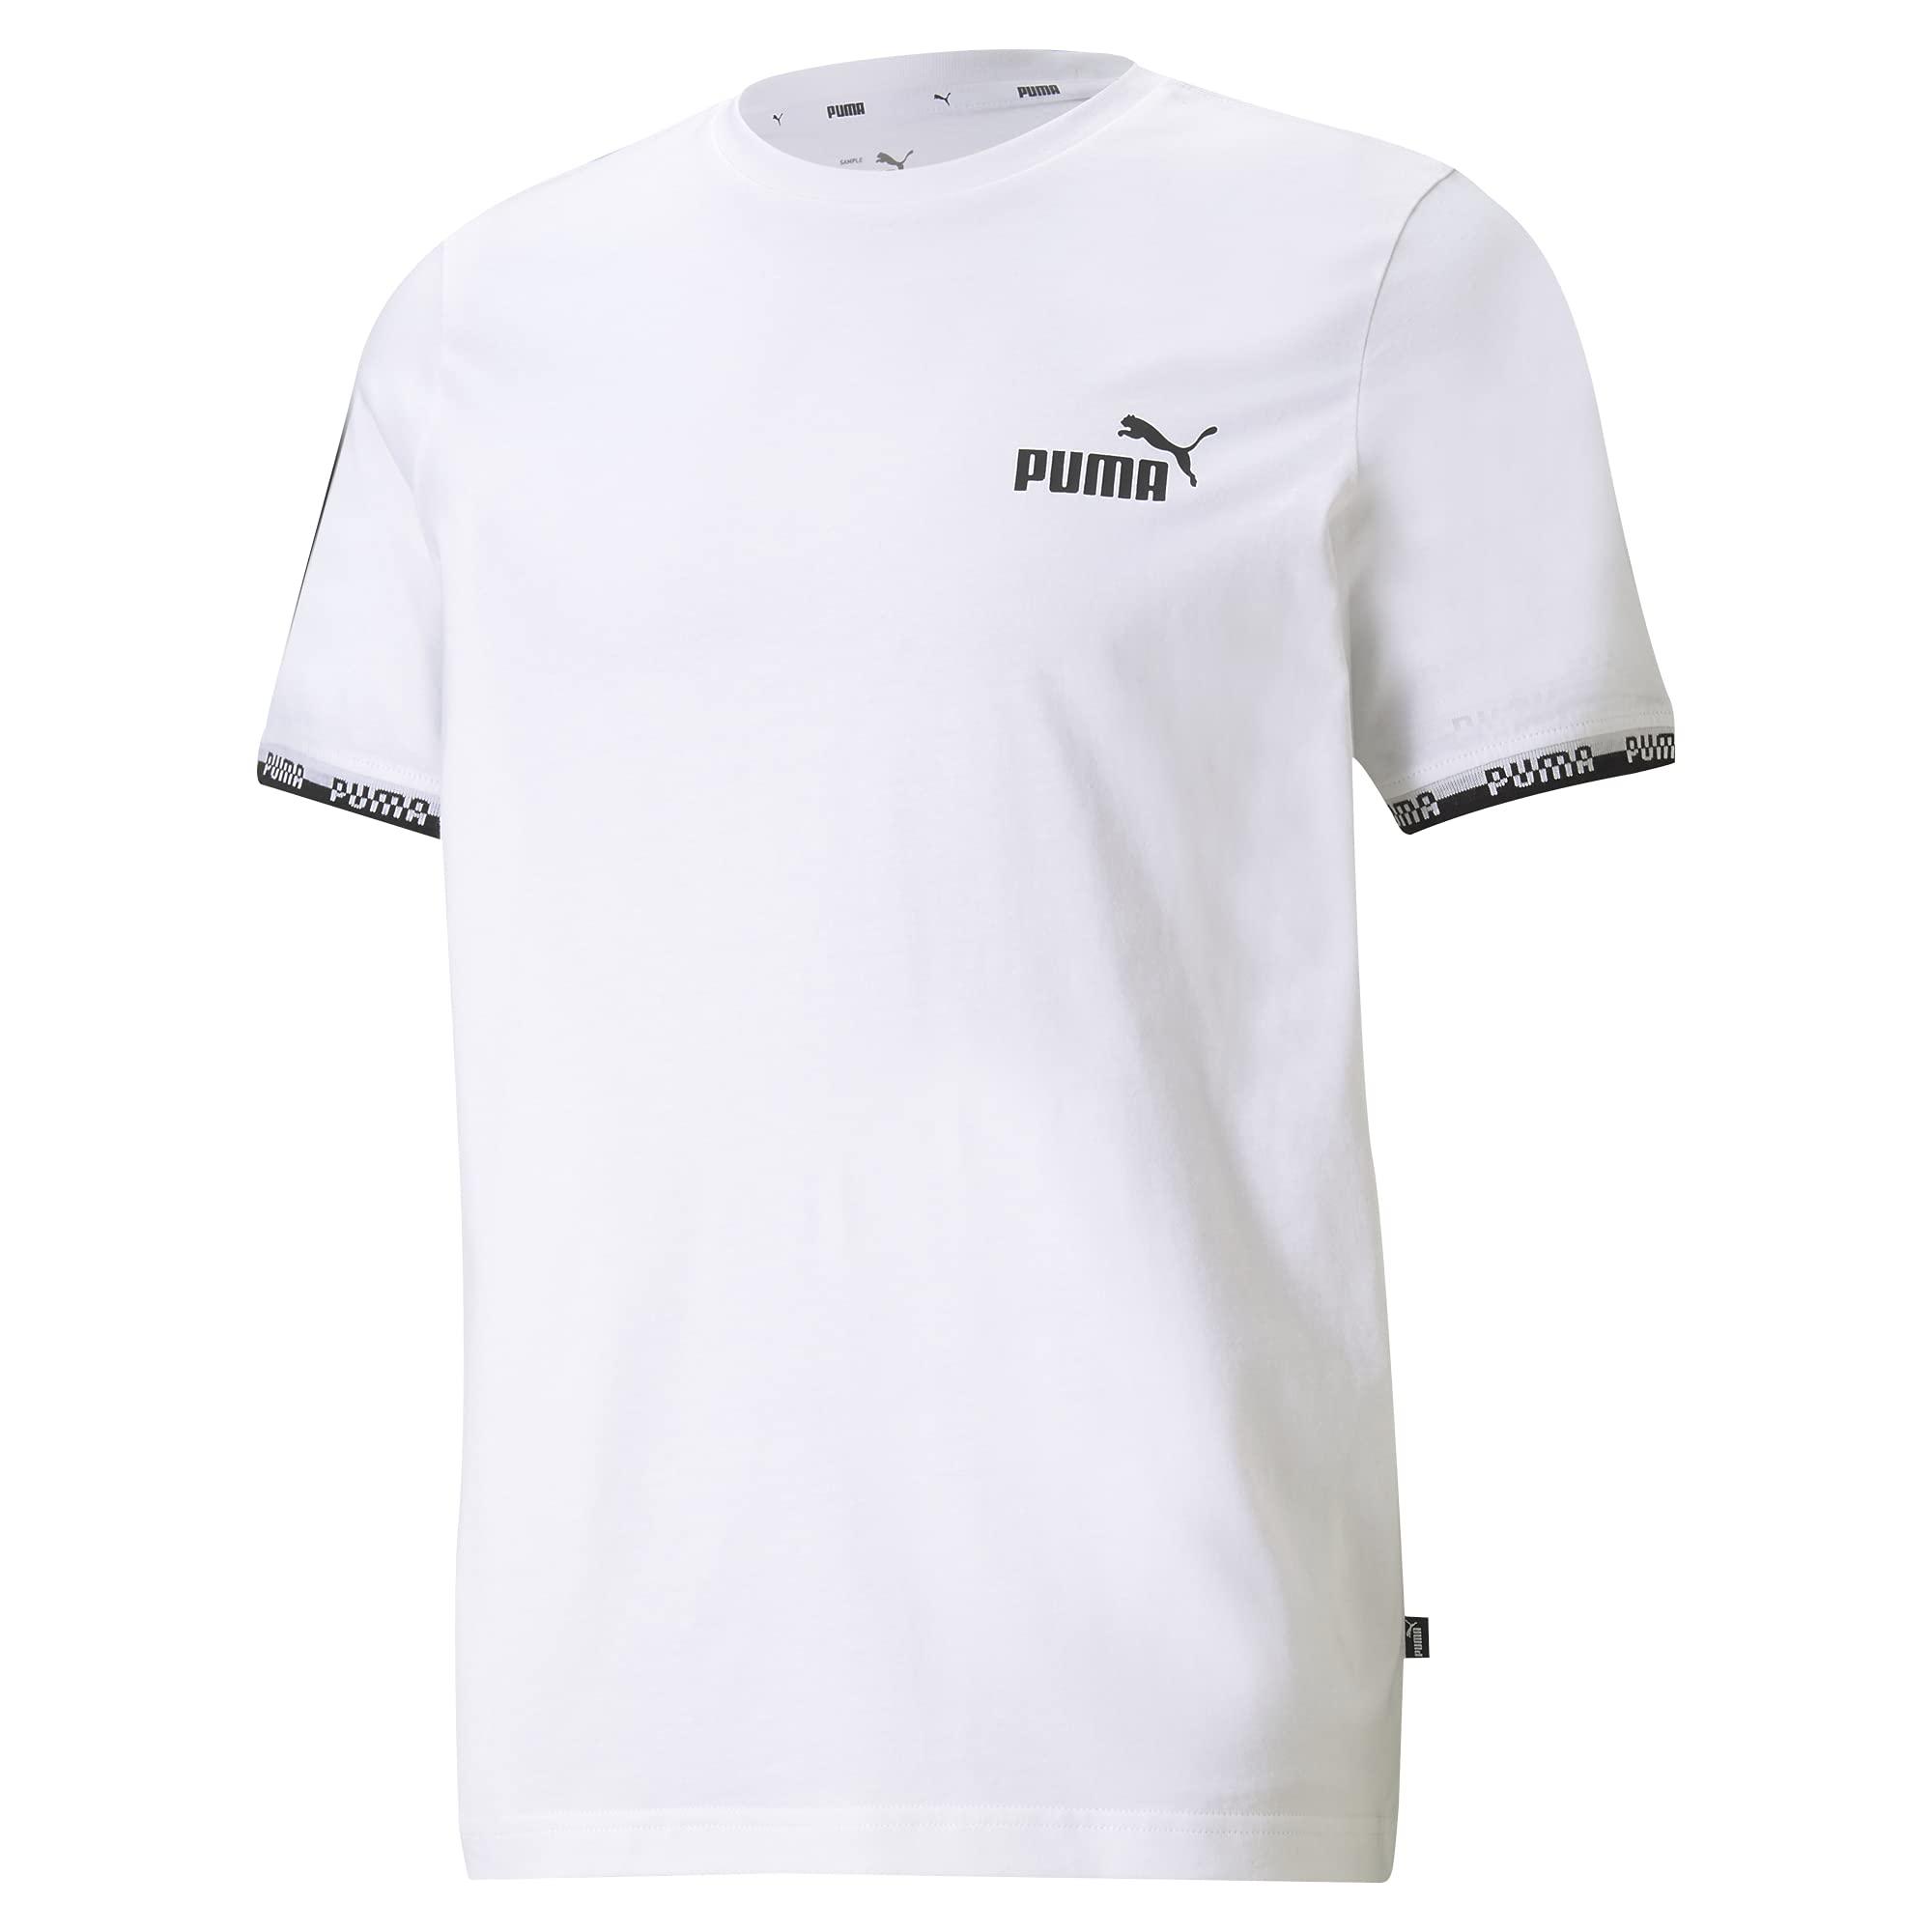 PUMA Rubber Amplified Short Sleeve T-shirt in White for Men - Save 44% |  Lyst